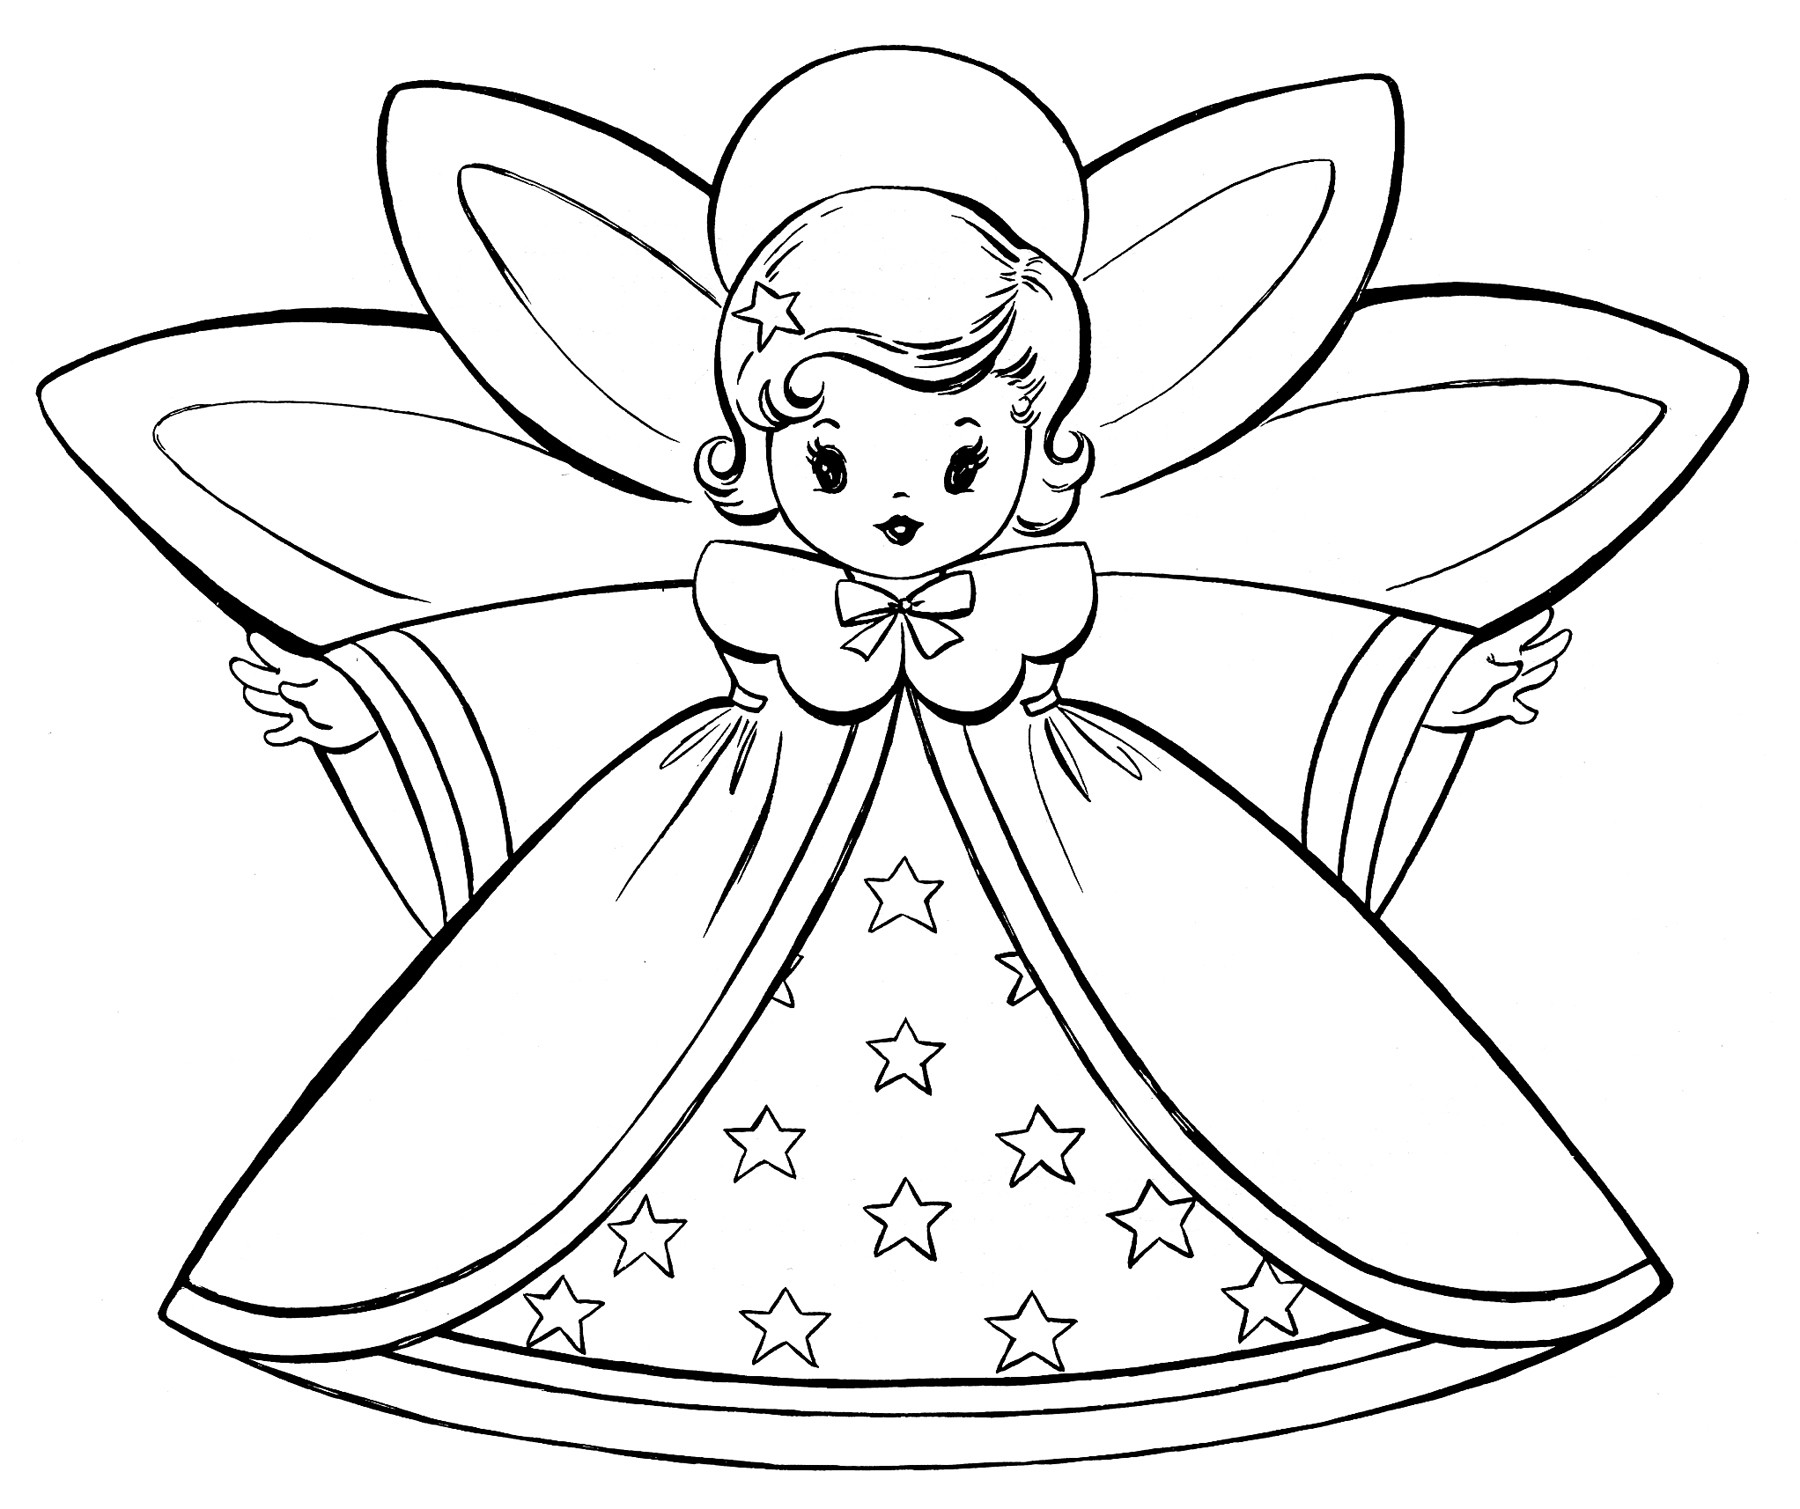 Free Christmas Coloring Pages For Kids
 Free Christmas Coloring Pages Retro Angels The